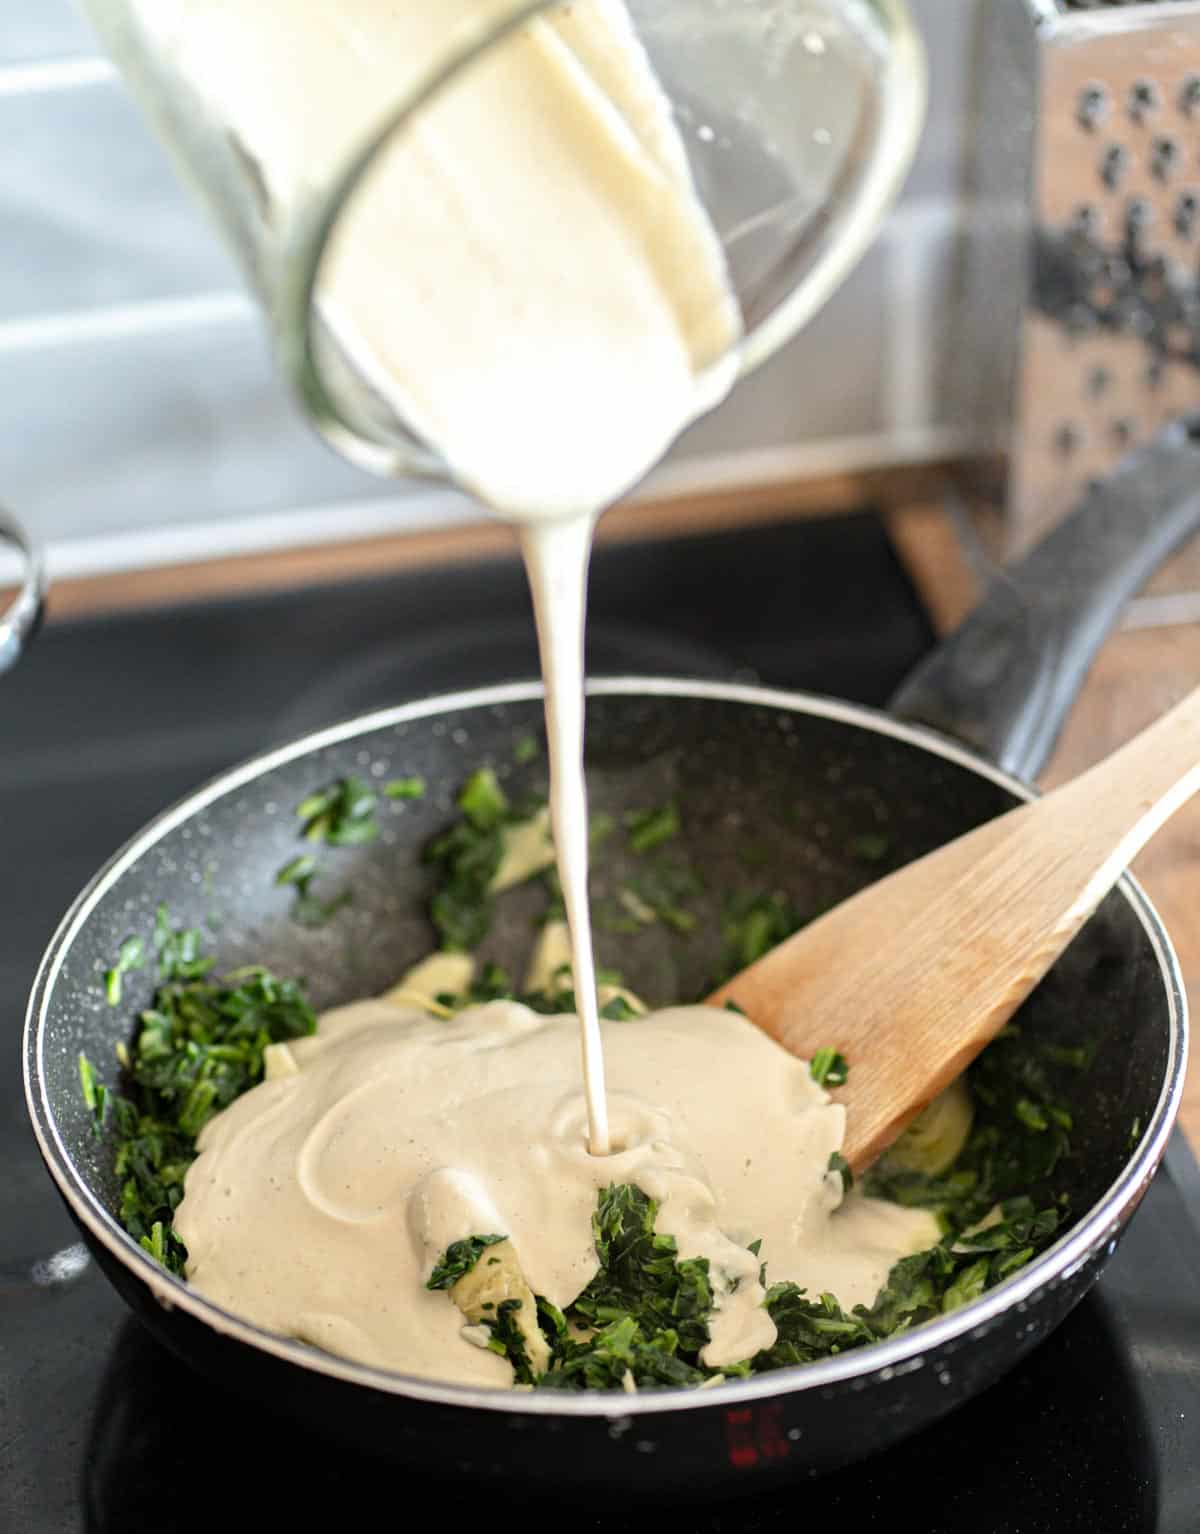 Pouring vegan creamy cashew sauce over spinach and artichoke.